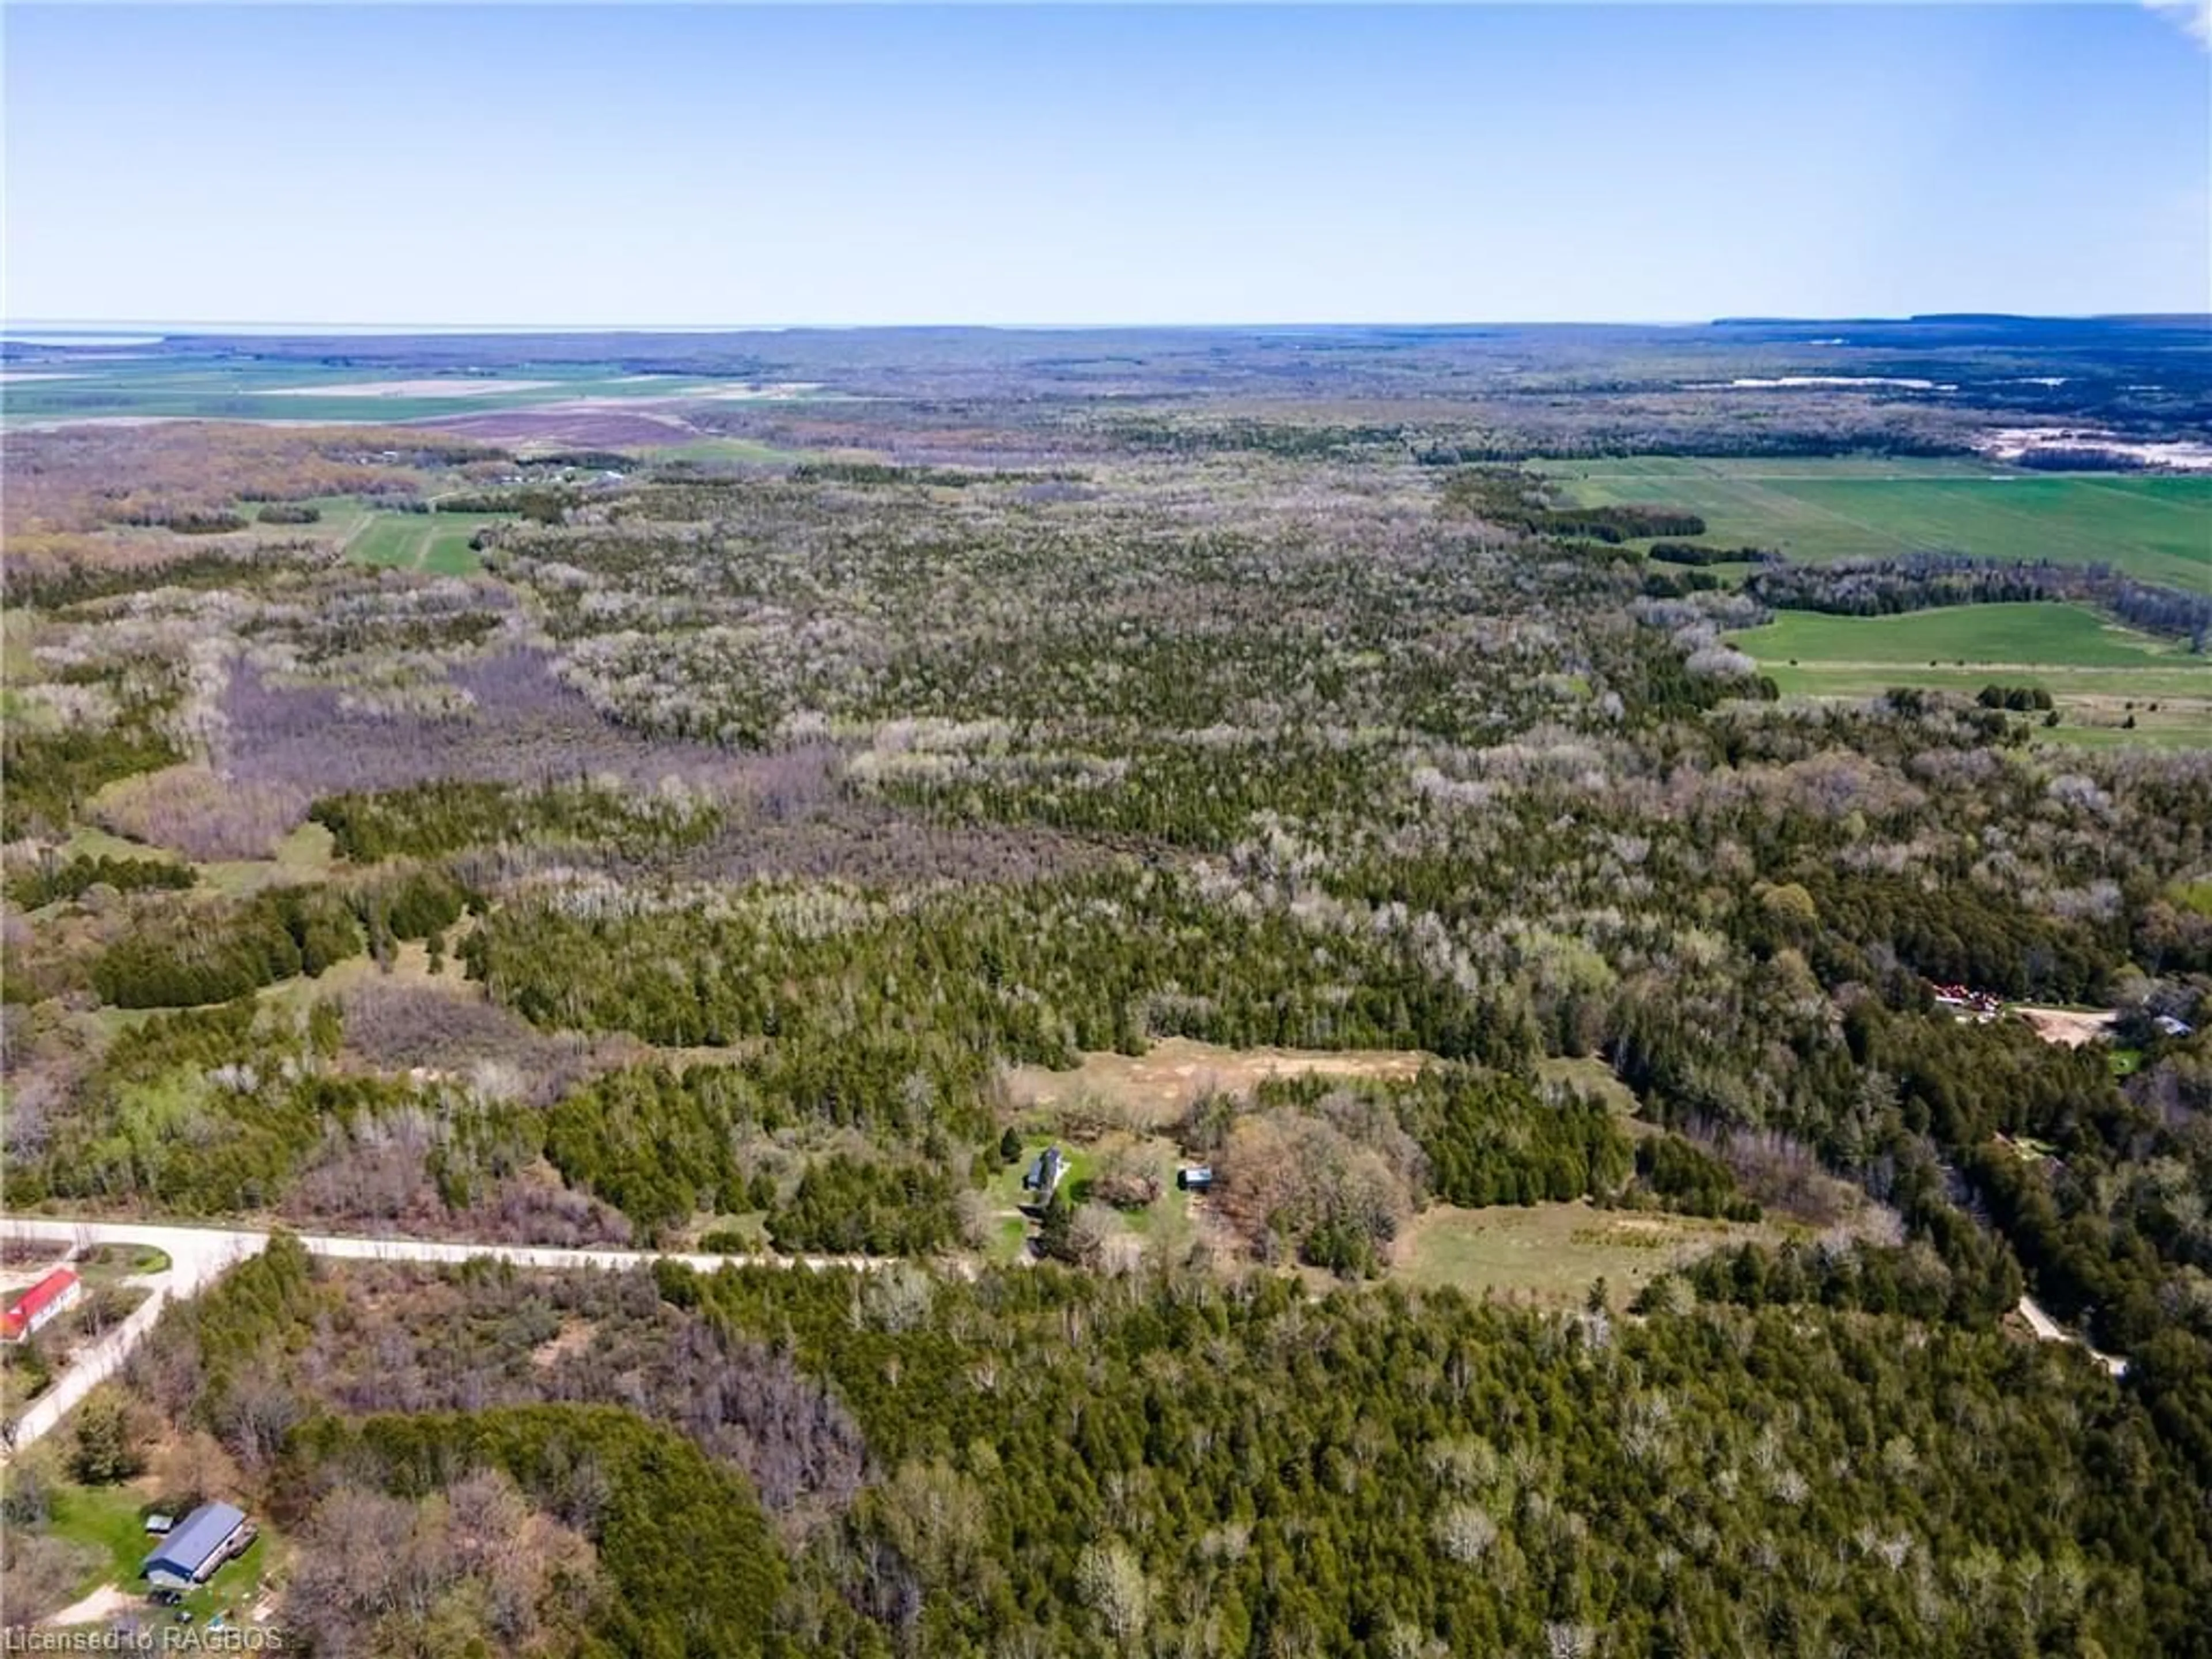 Lakeview for 544 West Rd, Northern Bruce Peninsula Ontario N0H 2T0